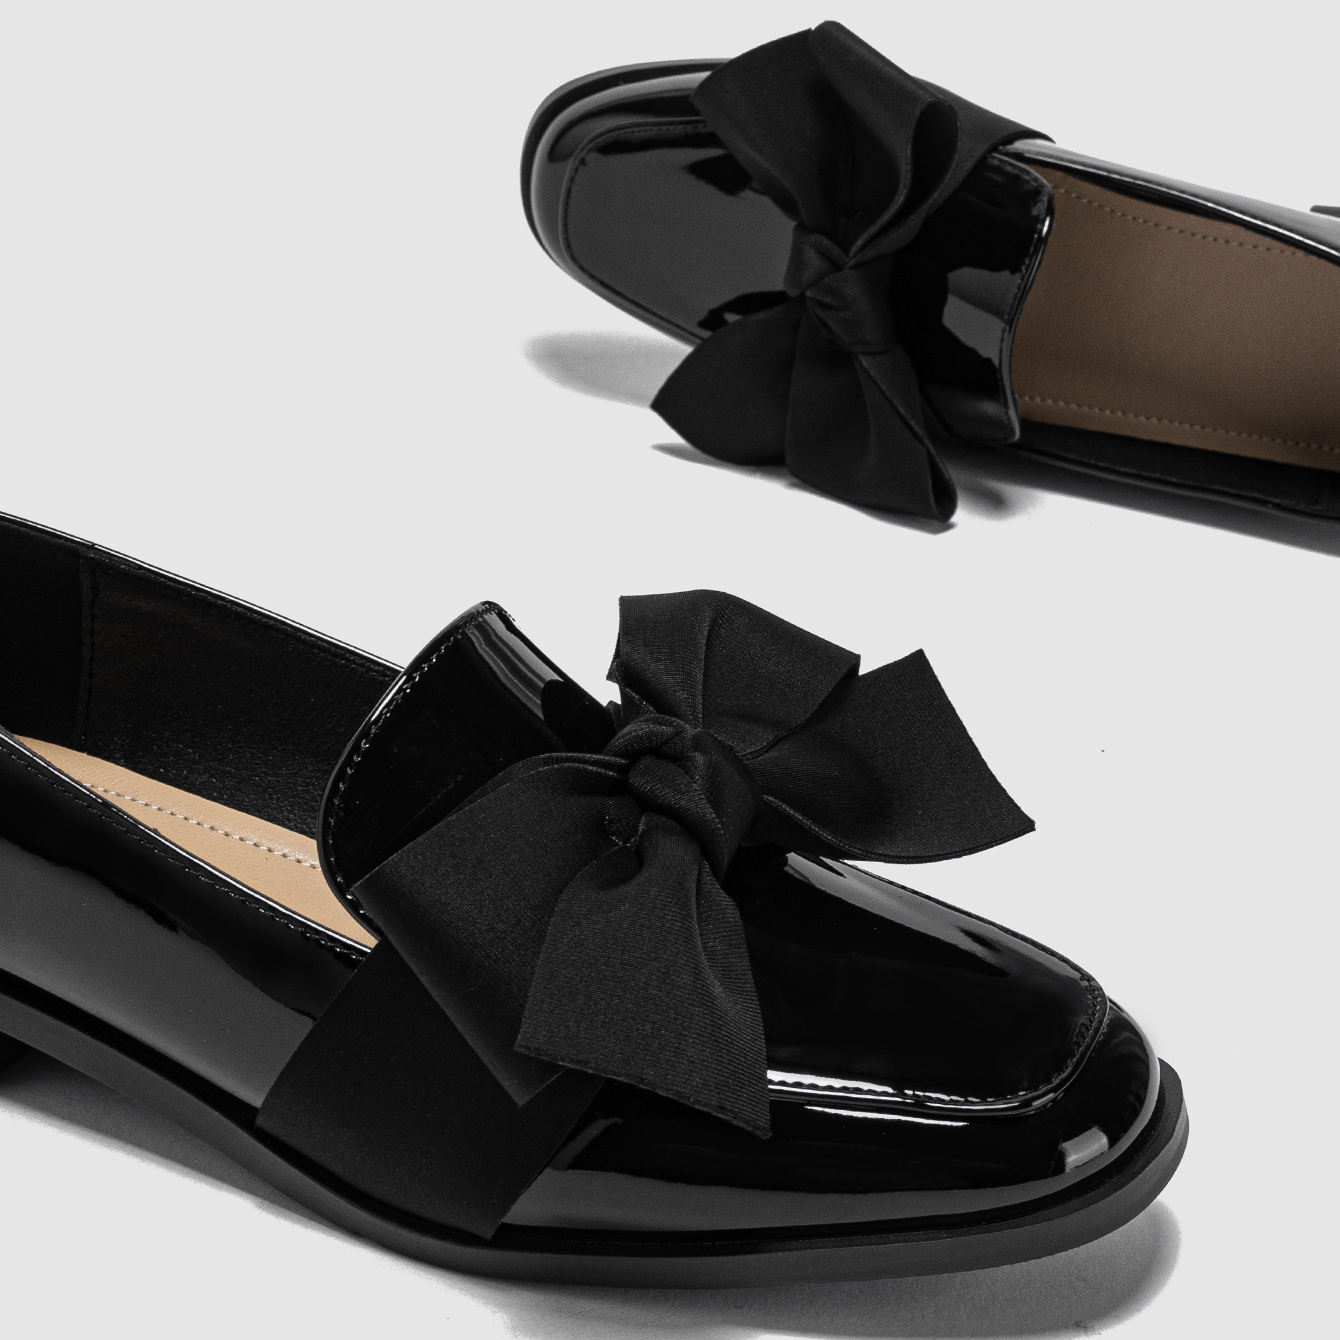 Women's Bowknot Loafers Square Toe Patent Leather Slip Shoes 